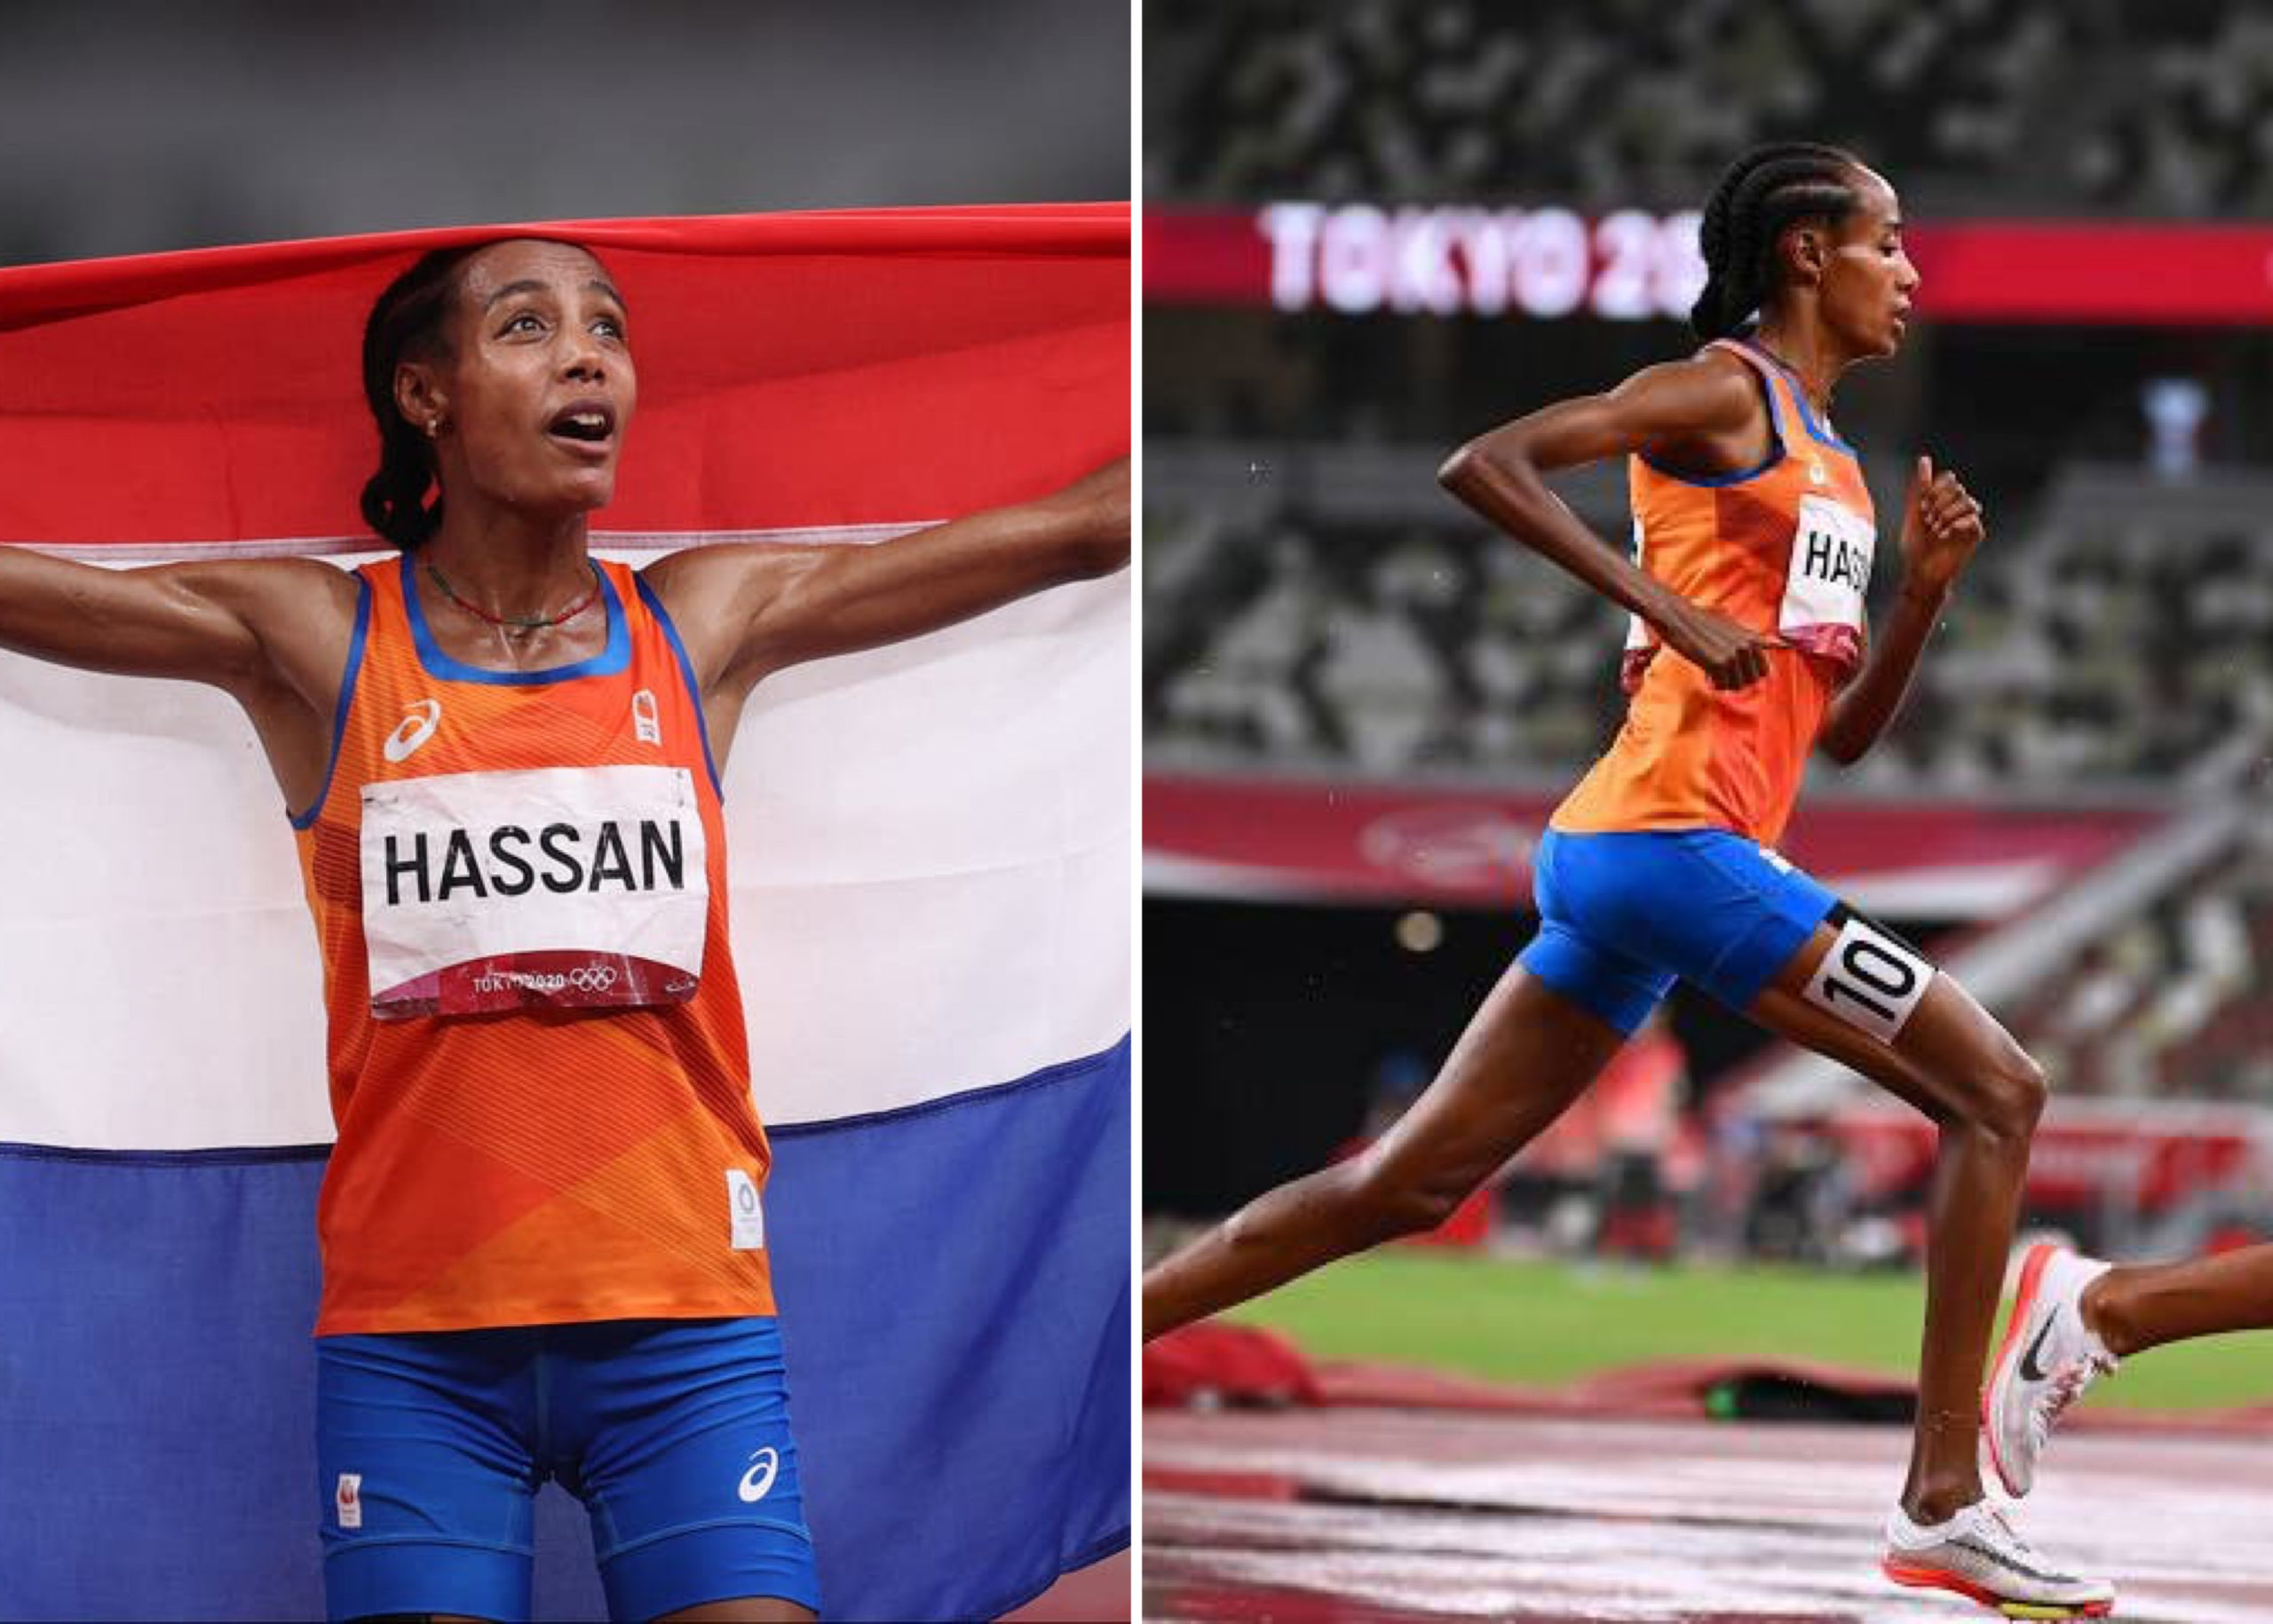 Dutch Runner, Sifan Hassan Wins 5,000m Race At Tokyo Olympics Amid Bid To Claim Historic Gold Medal Treble